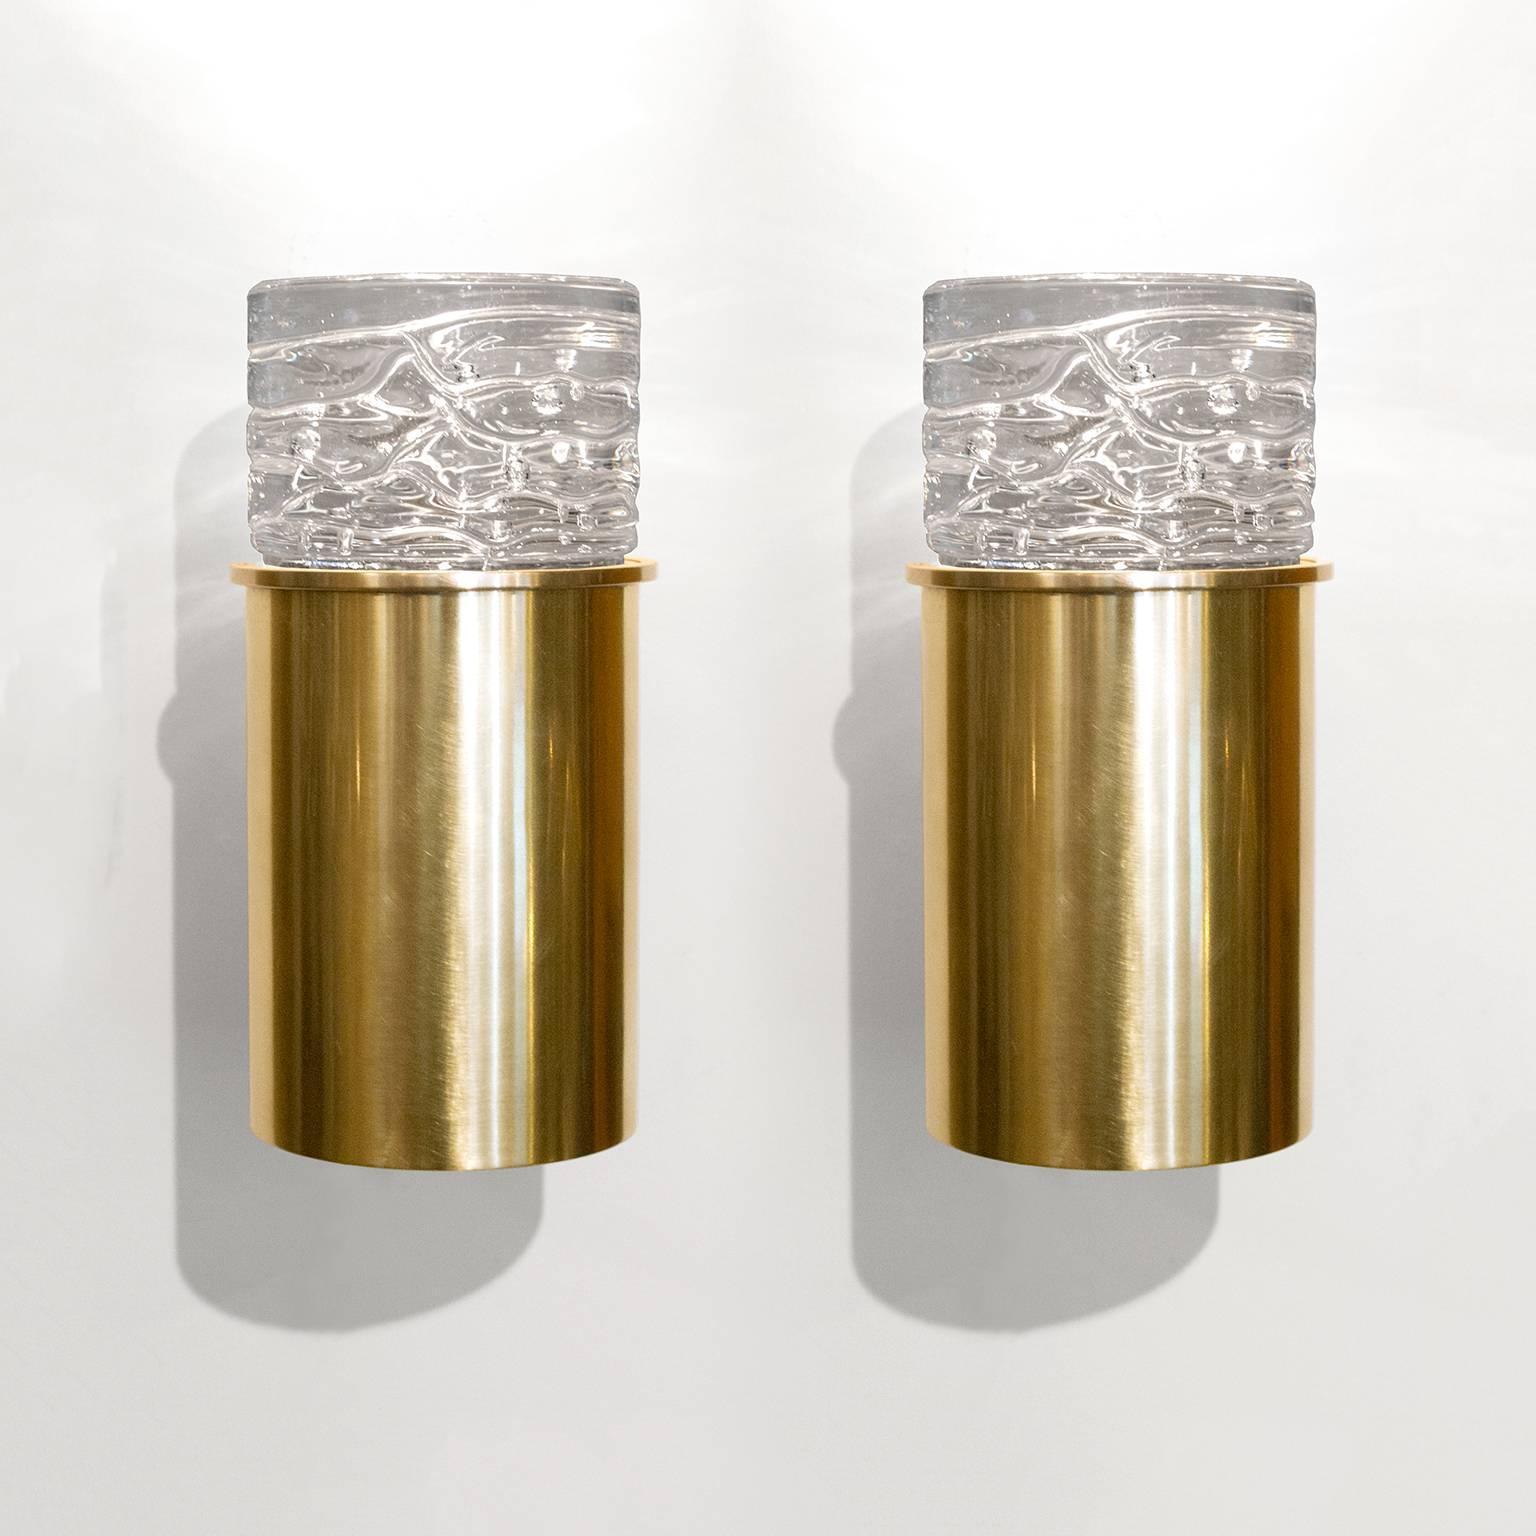 Swedish Scandinavian Modern Polished Brass Cylindrical Sconces with Solid Crystal Tops For Sale